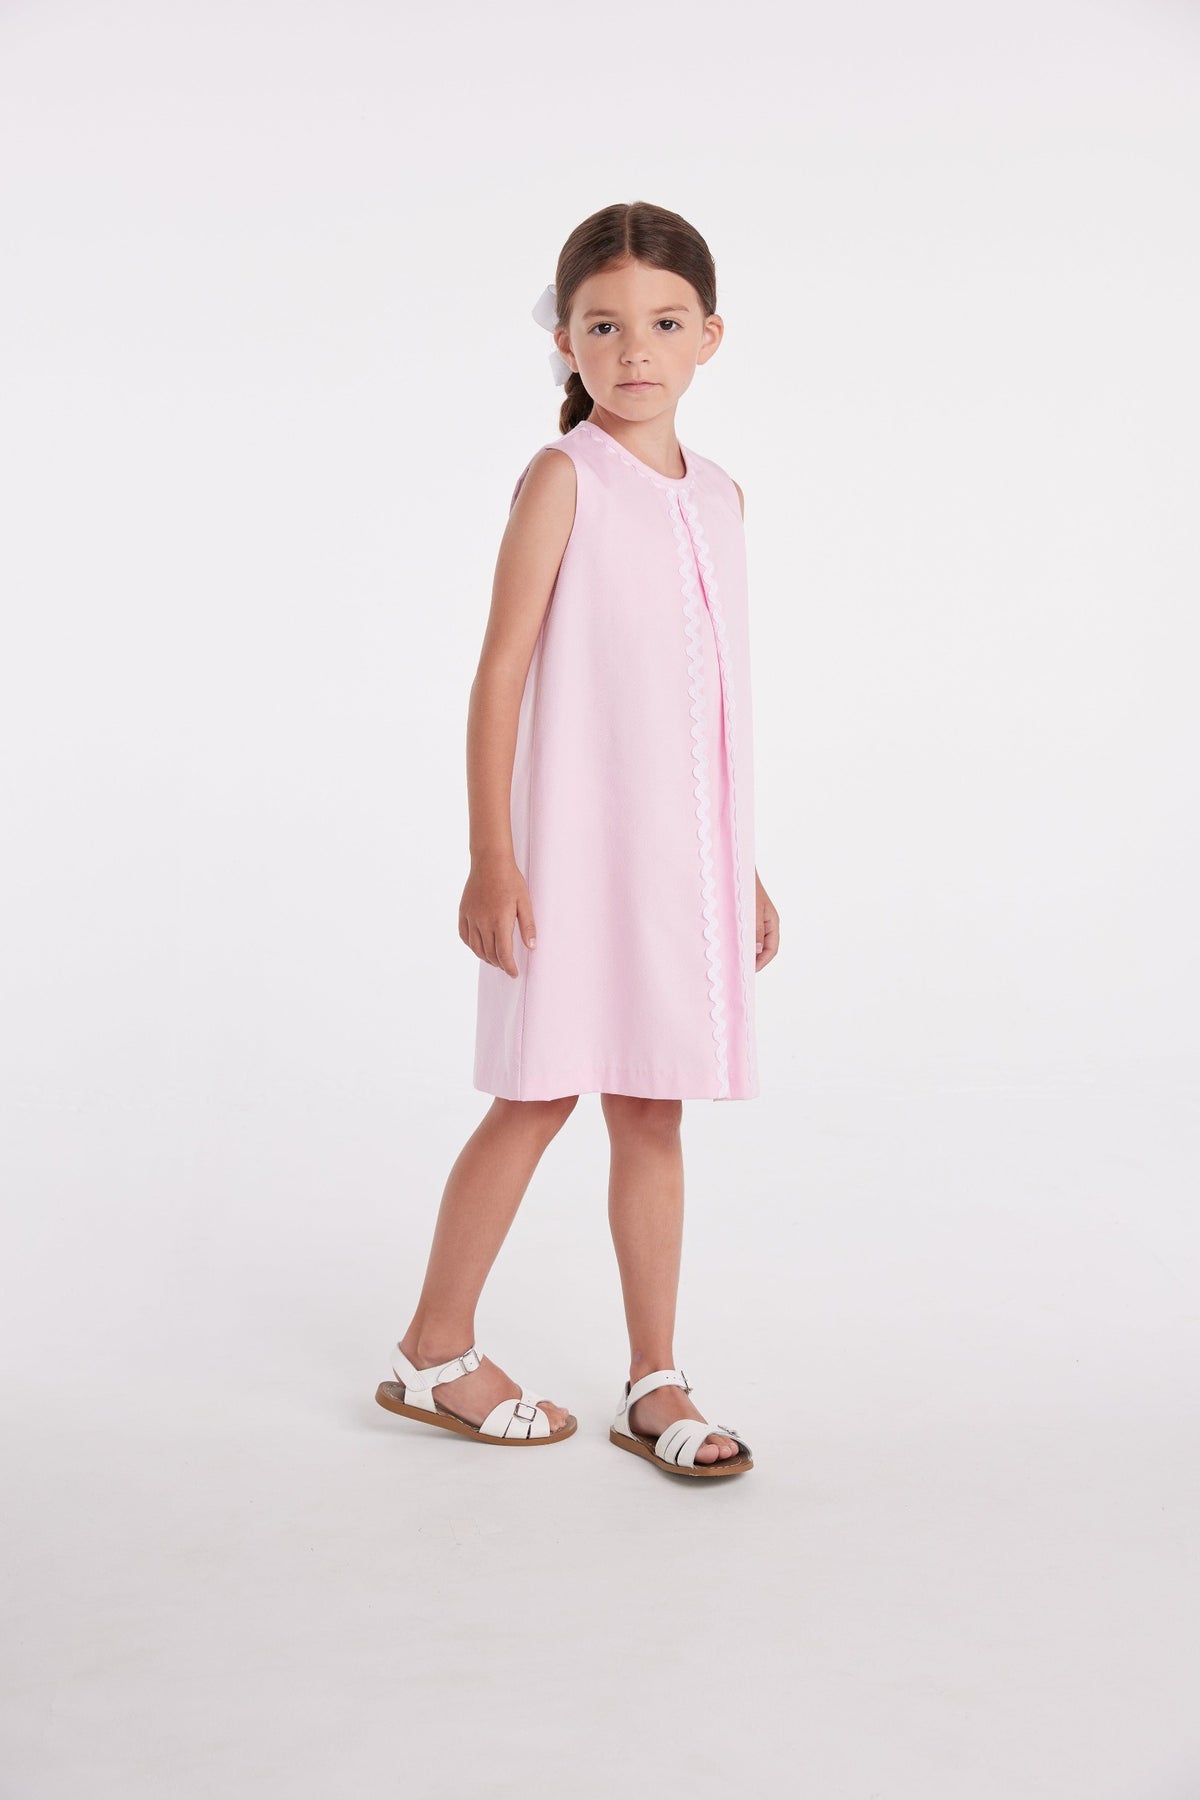 classic childrens clothing girls shift dress in light pink twill with ric rac trim